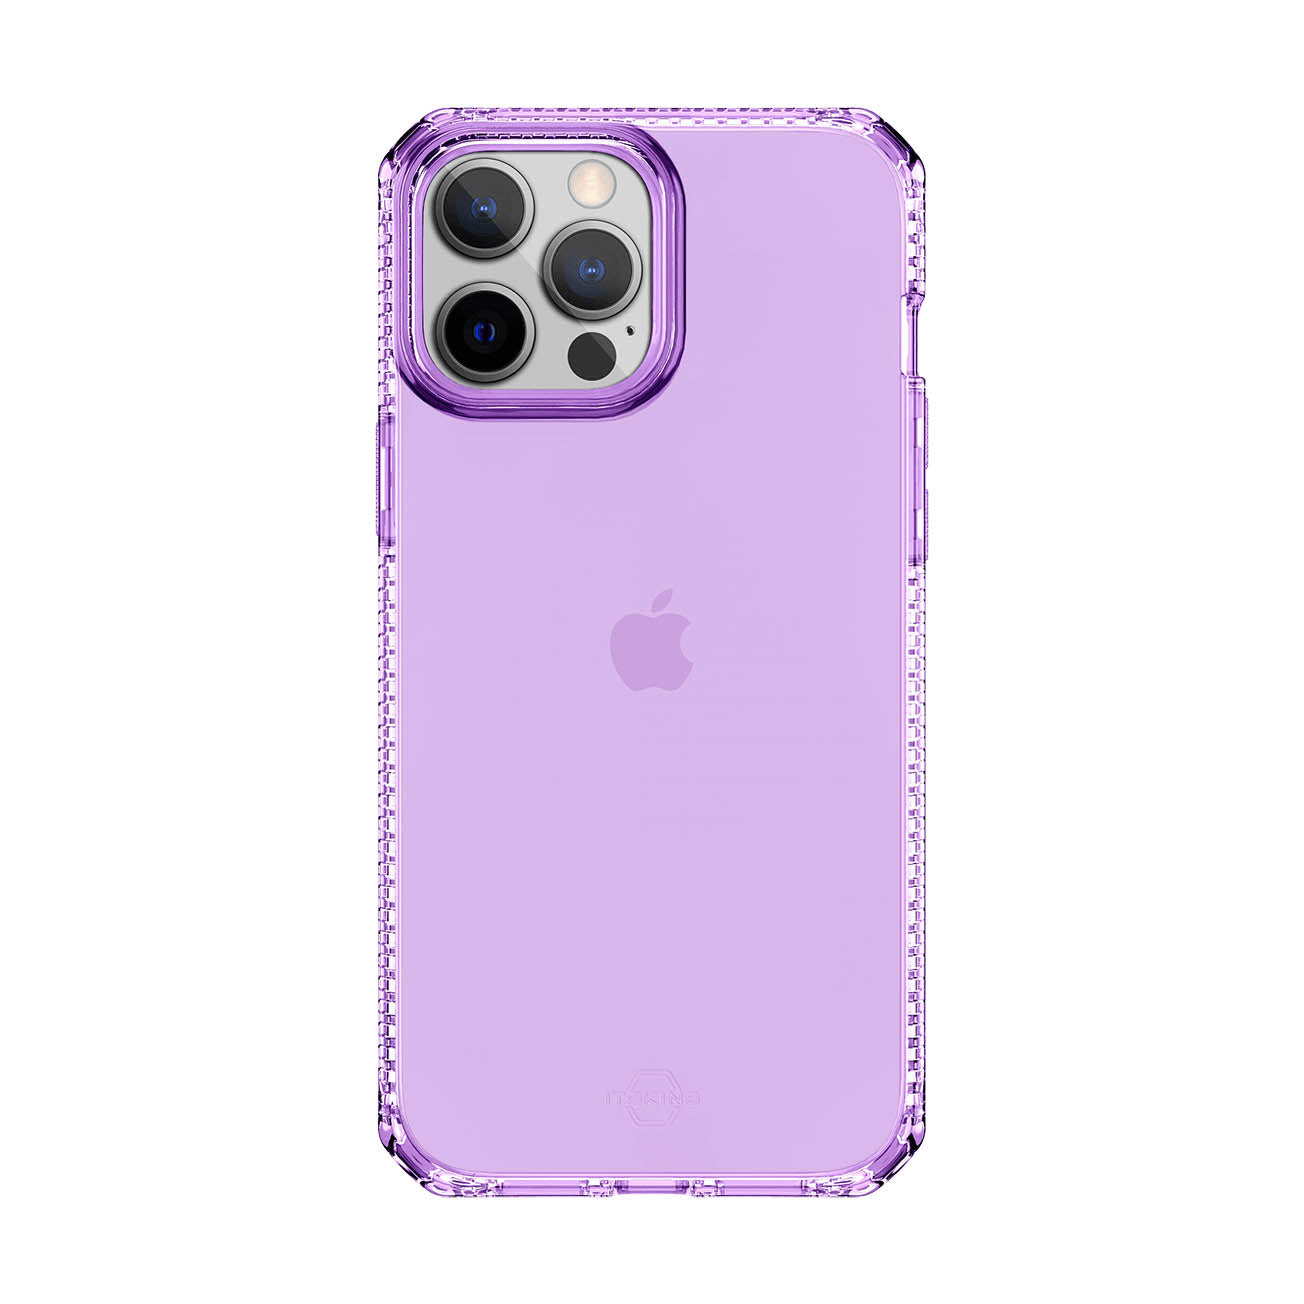 ITSKINS Spectrum Clear Case For iPhone 13 Pro Max / 12 Pro Max - Light Purple